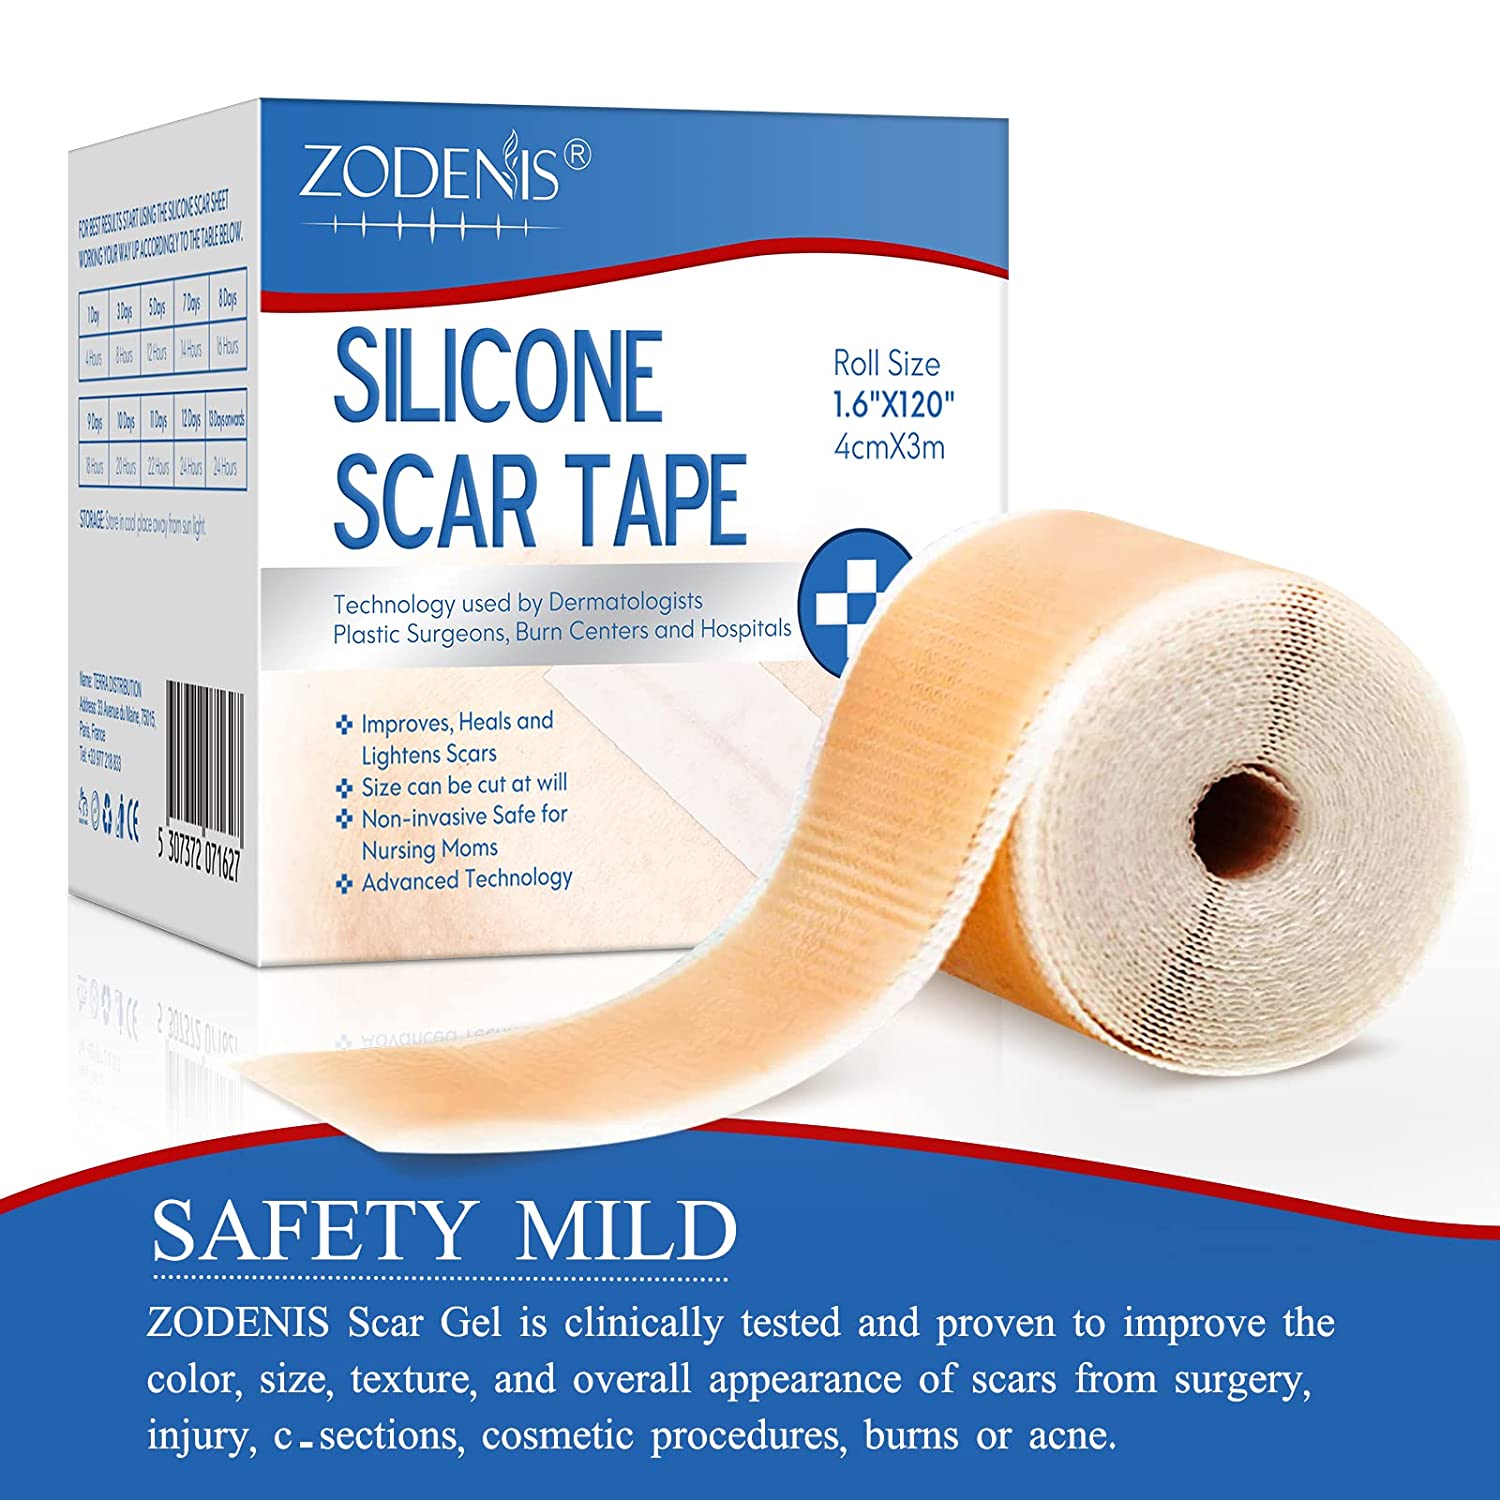 Silicone Scar Sheets - Tape Roll - Medrock Pharmacy